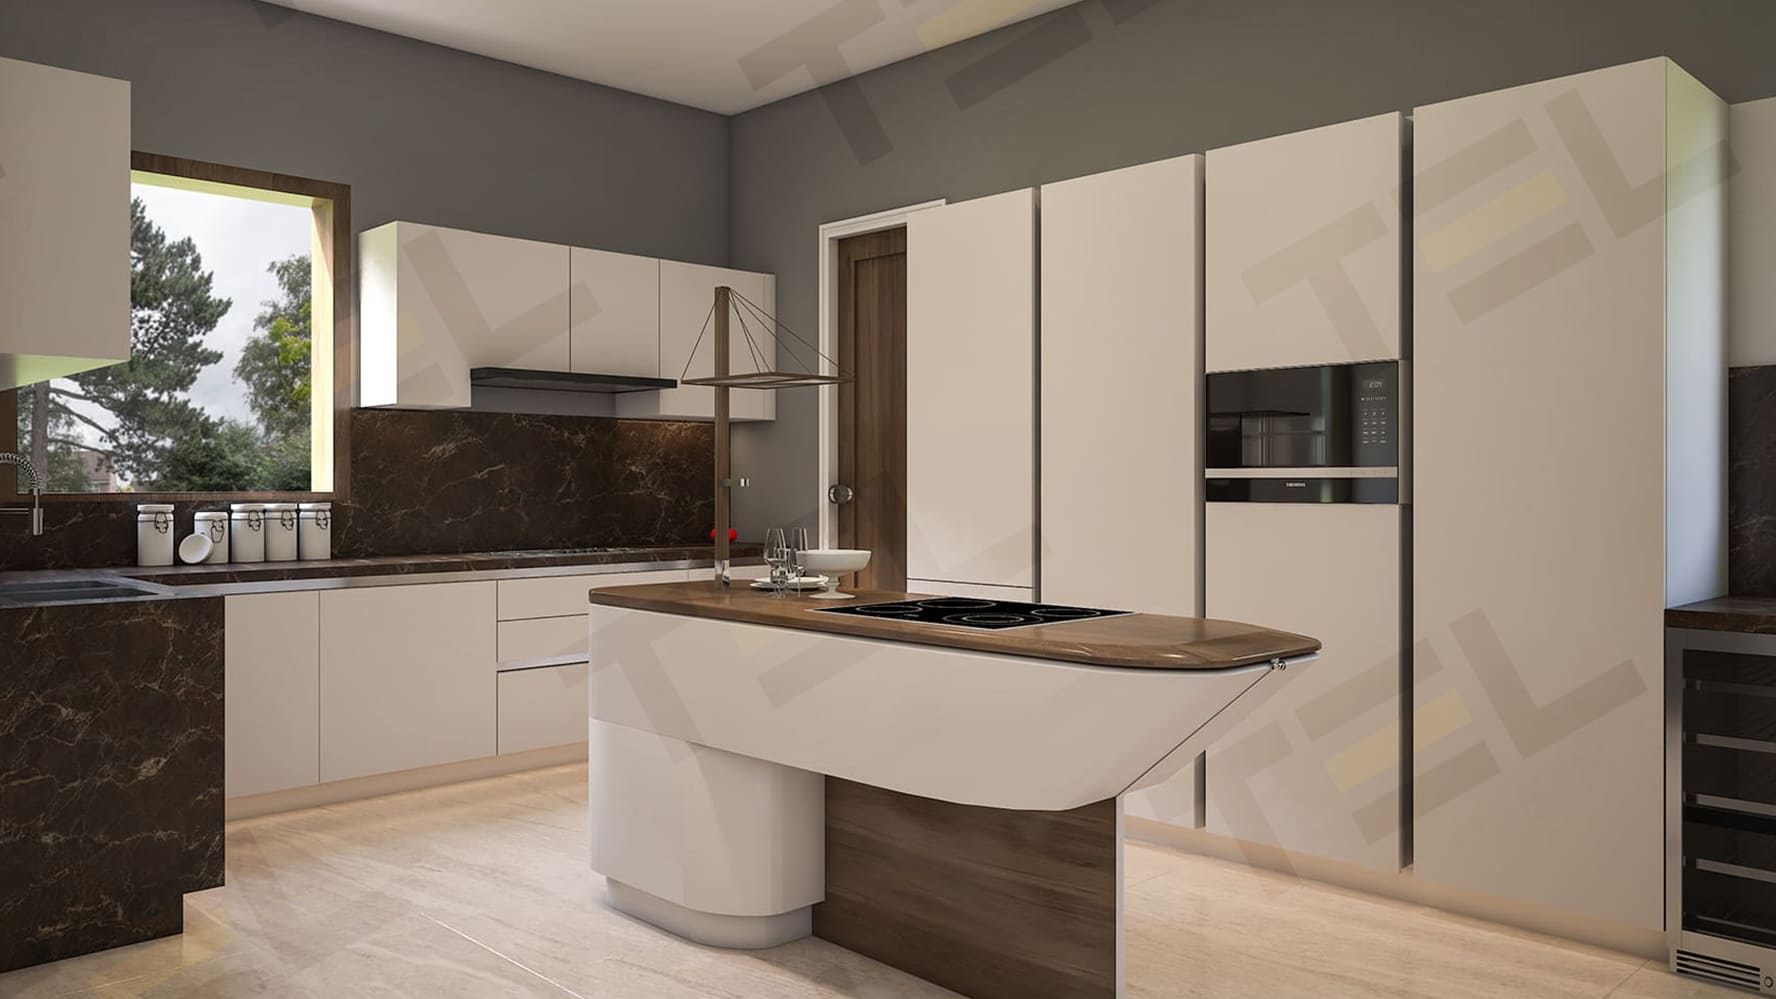 Contemporary kitchen design in white and brown